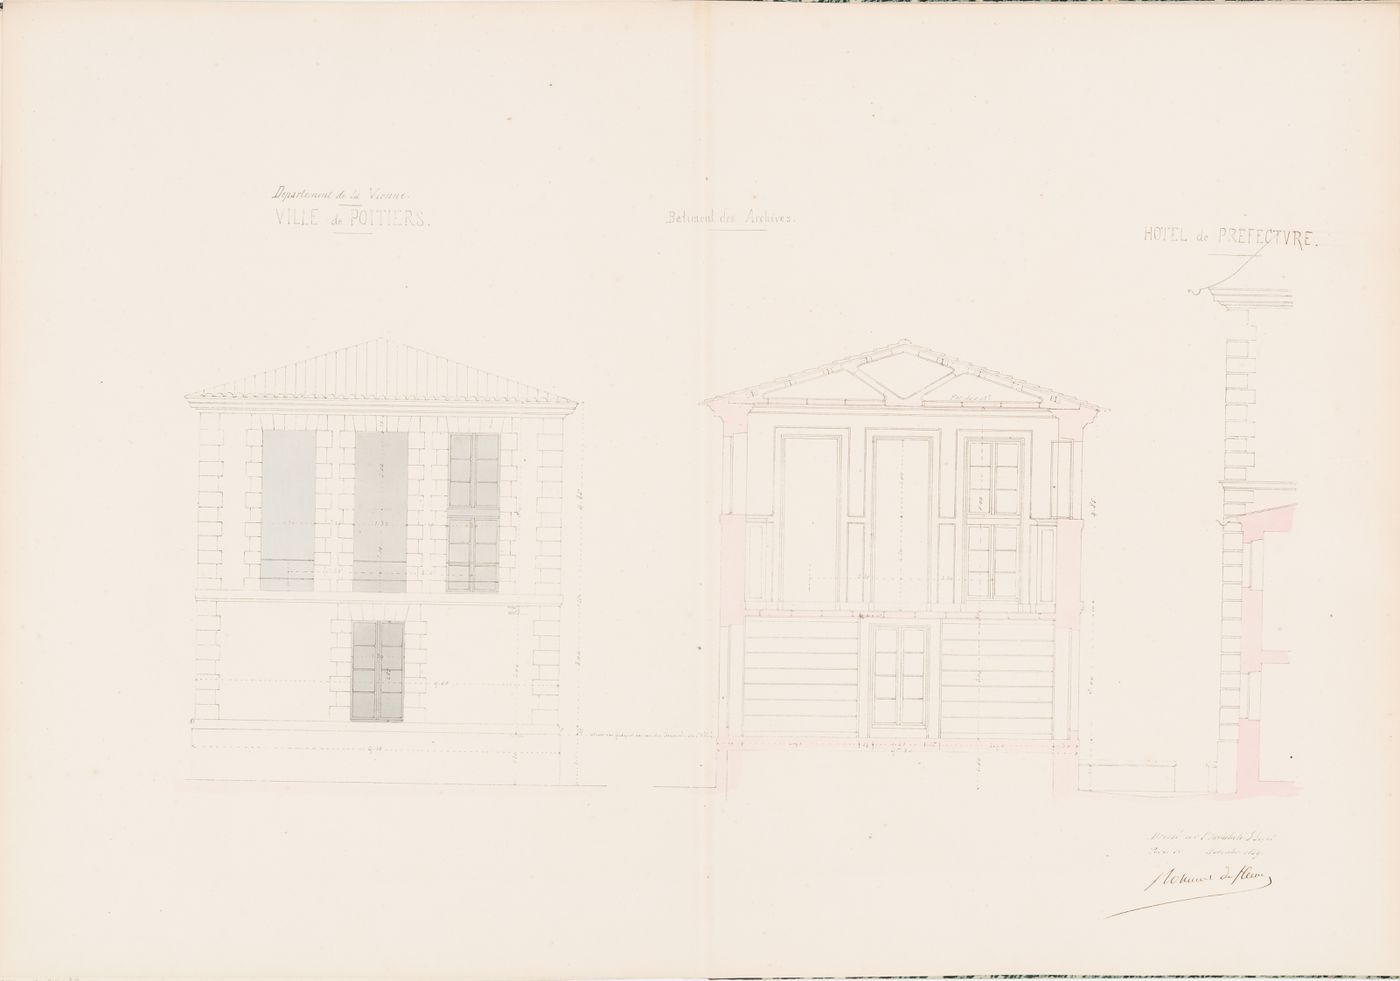 Project for a Hôtel de préfecture, Poitiers: Side elevation and cross section for the Archives building